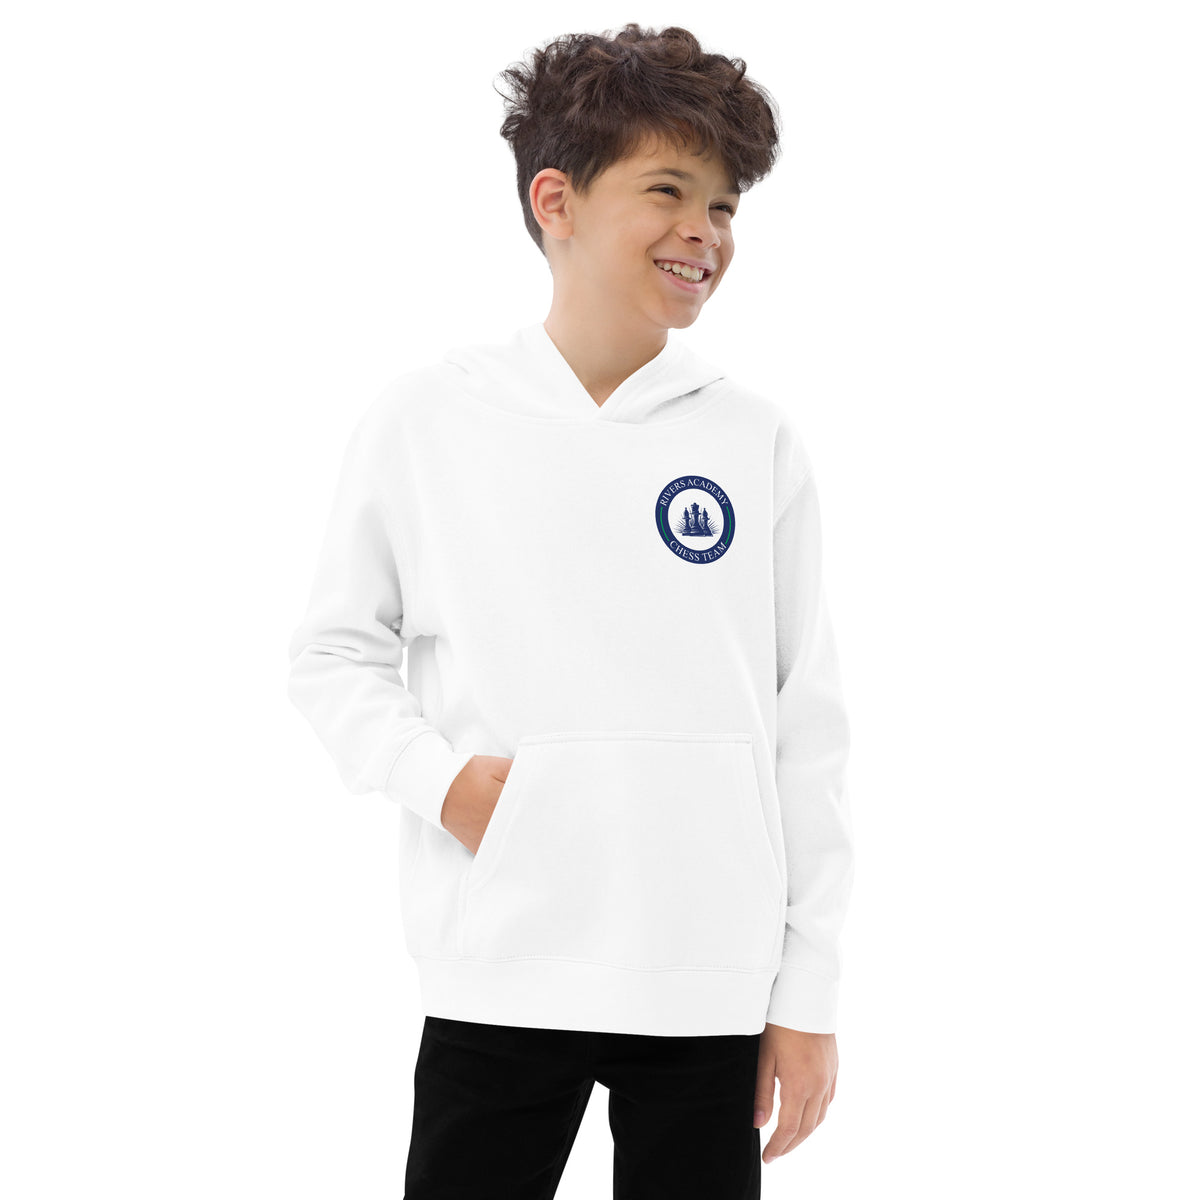 Rivers Academy Chess Team Logo Fave Youth Hoodie